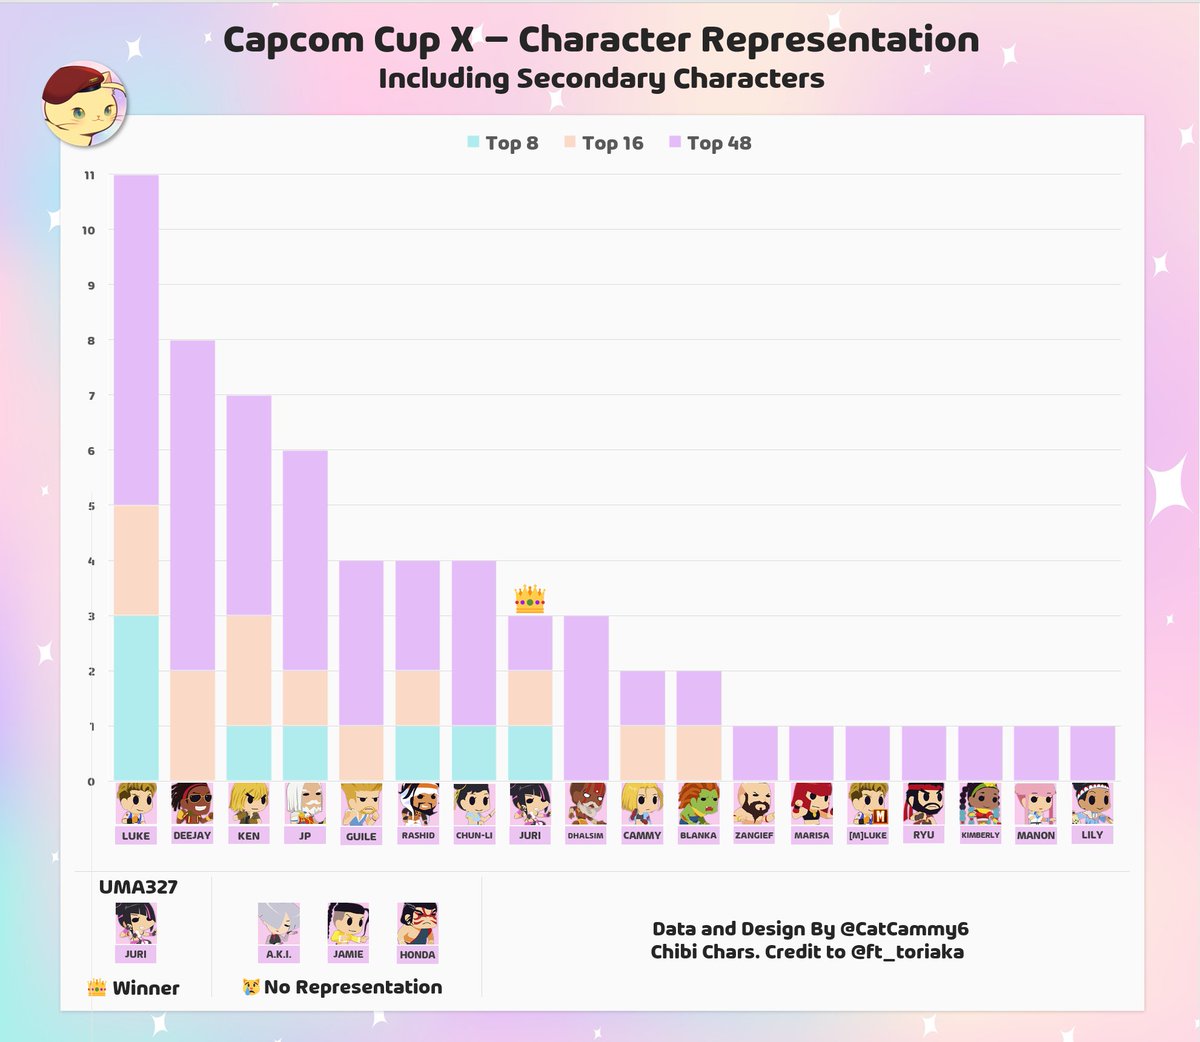 #StreetFighter6 #SF6 #CapcomCup The Final Infographic for this season 🙂 Detailed Capcom Cup X Character Representation, including secondaries. Congratulations to @uma327_sf6 for doing a great run and winning the tournament with his impressive Juri!